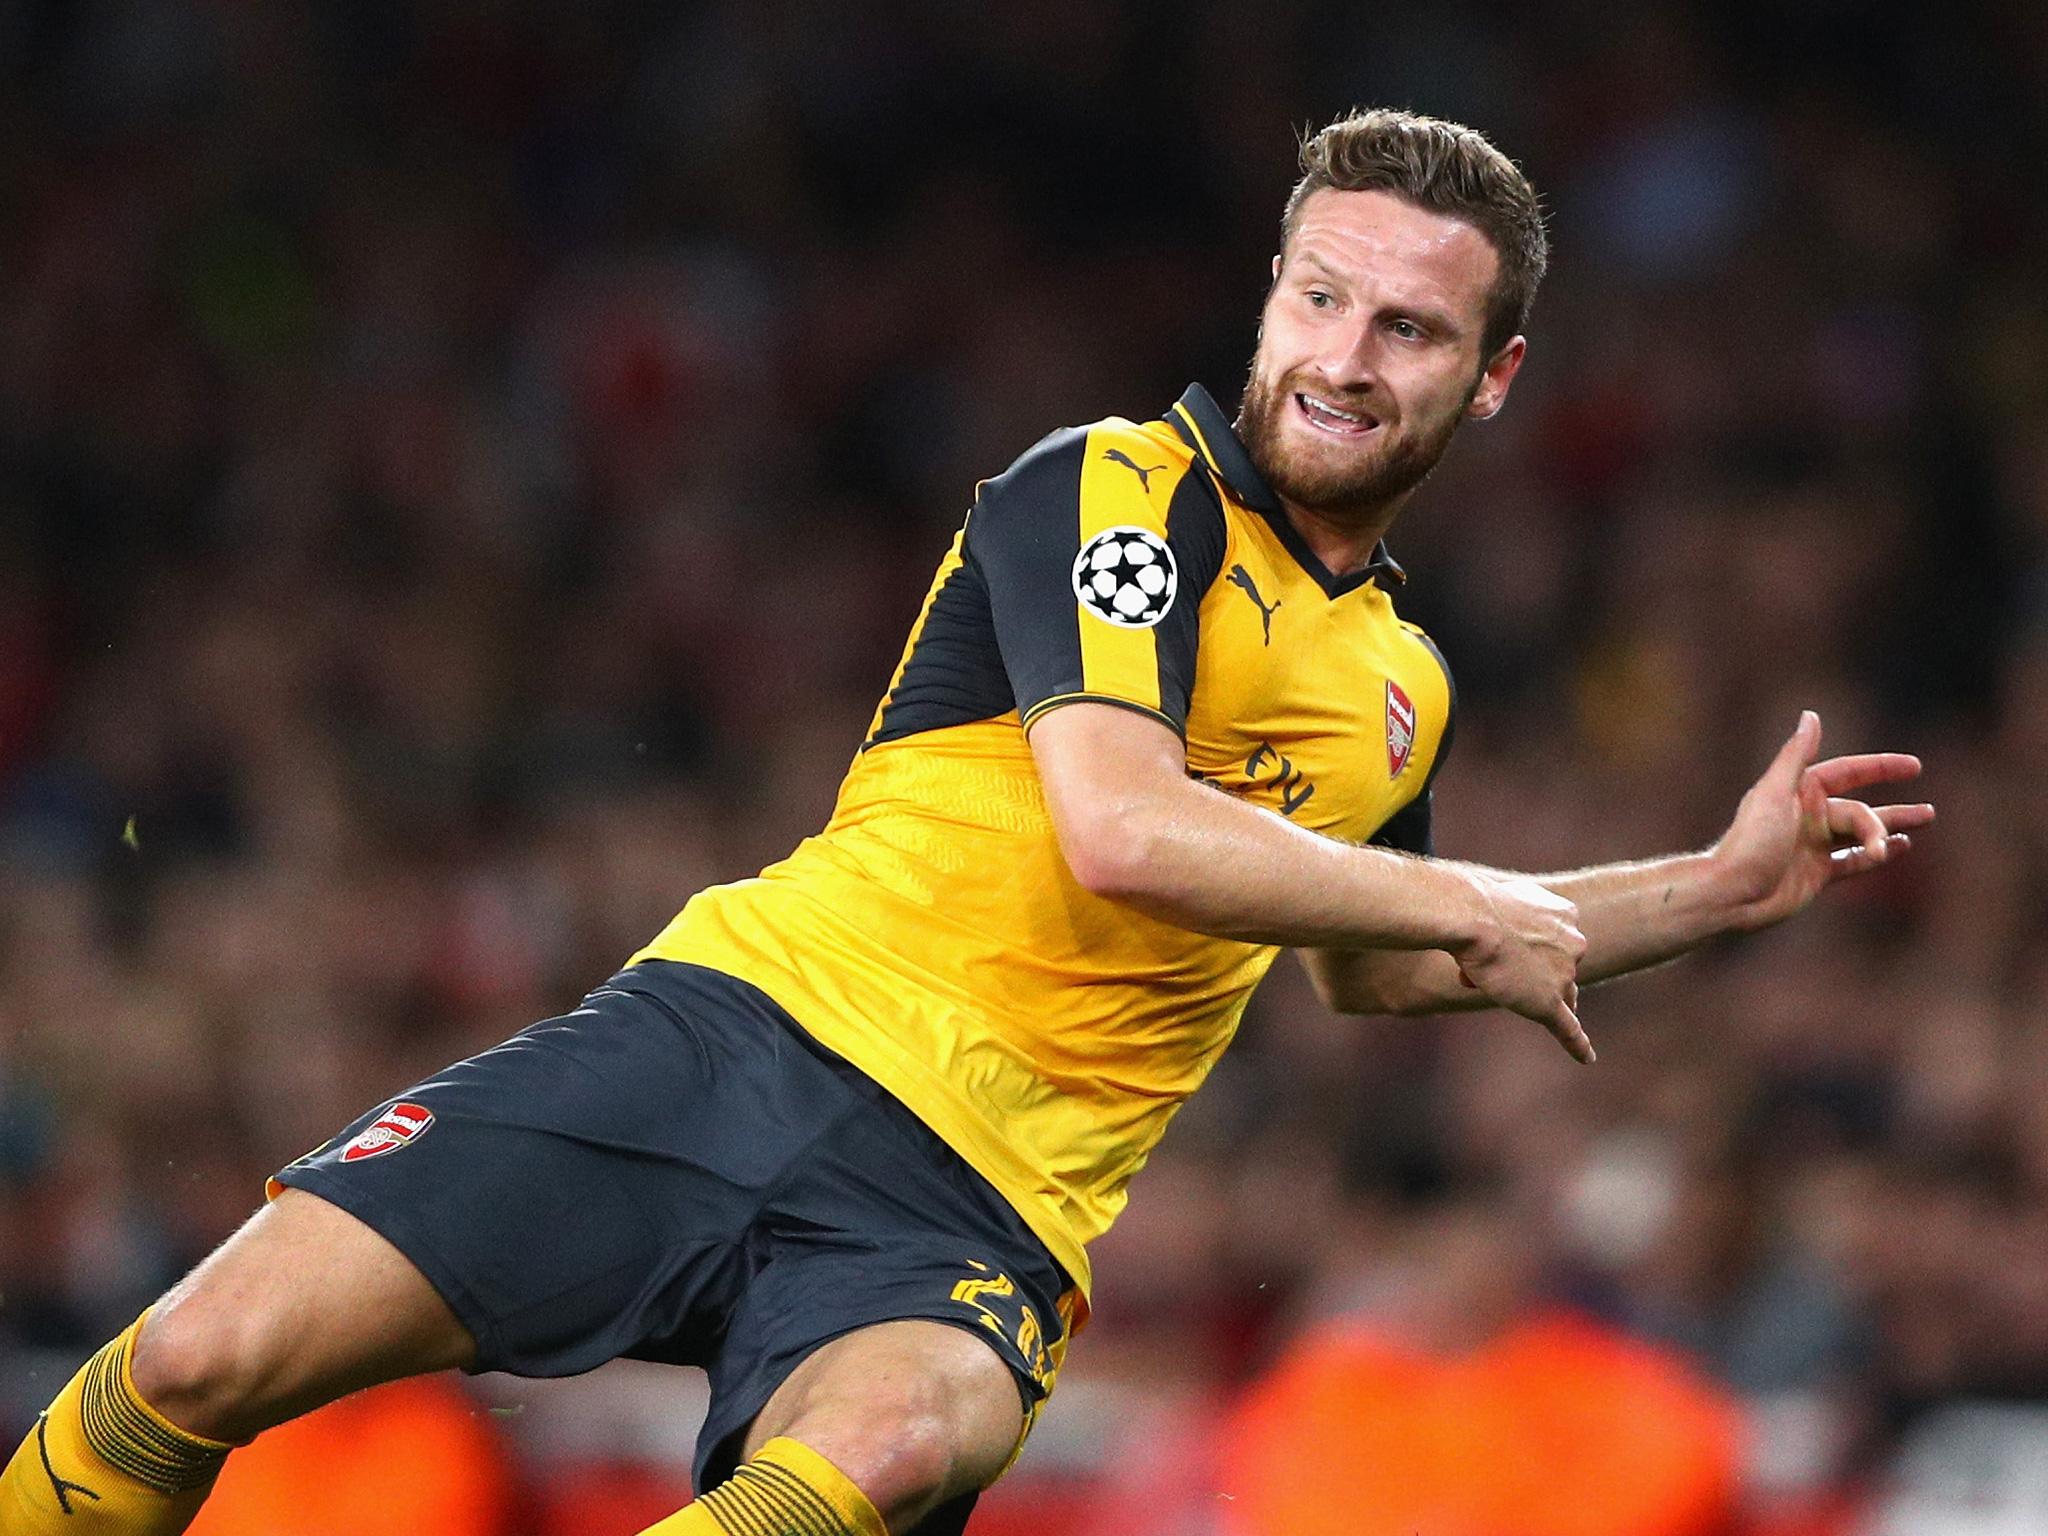 Mustafi is already proving his £30m fee was justified